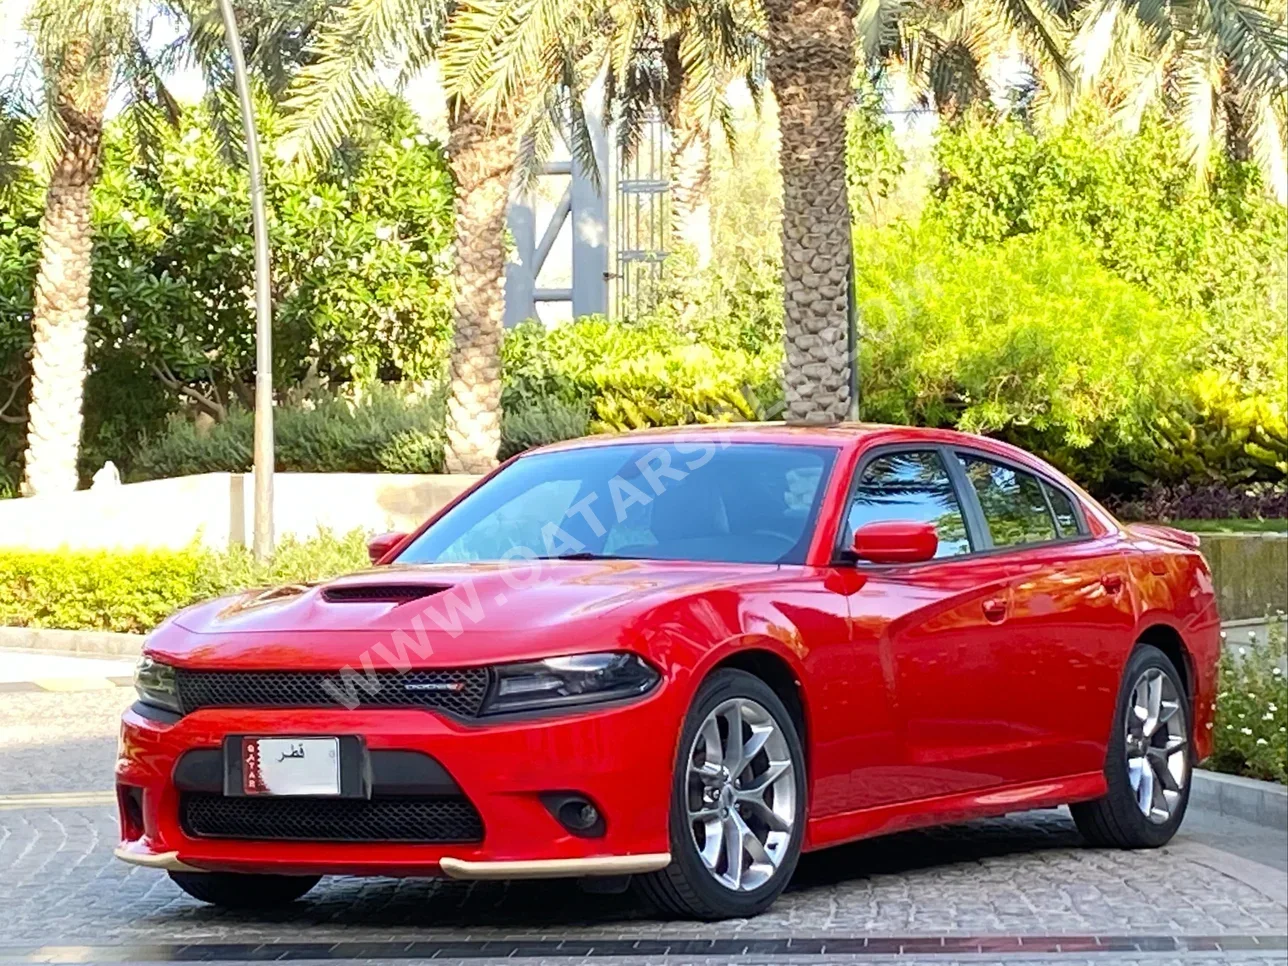 Dodge  Charger  GT  2019  Automatic  91,000 Km  6 Cylinder  Four Wheel Drive (4WD)  Sedan  Red